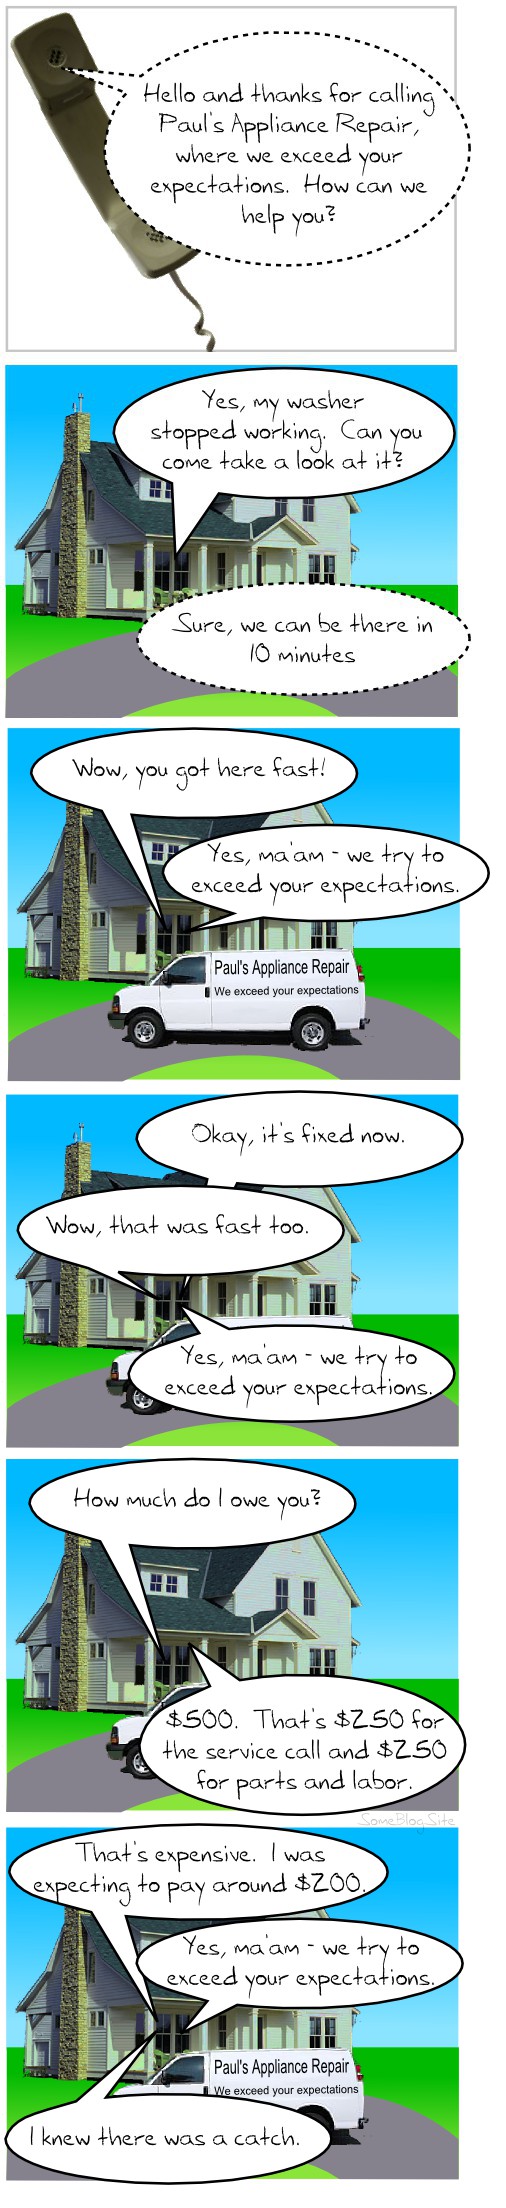 comic showing a plumber who exceeds a customers expectations, including on the price